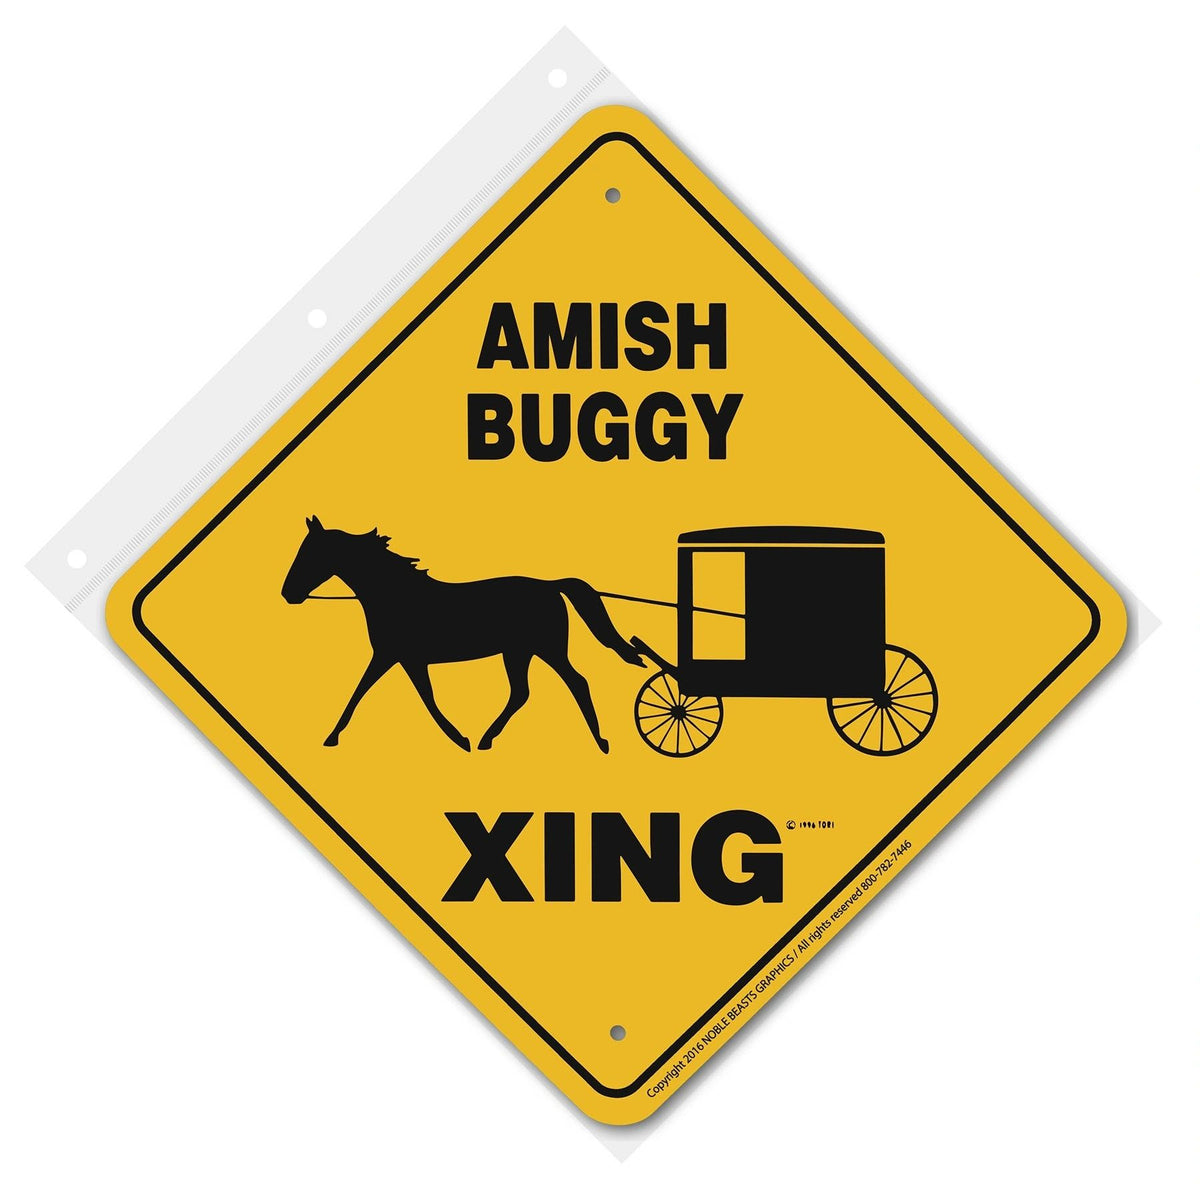 Amish Buggy Xing Sign Aluminum 12 in X 12 in #20918